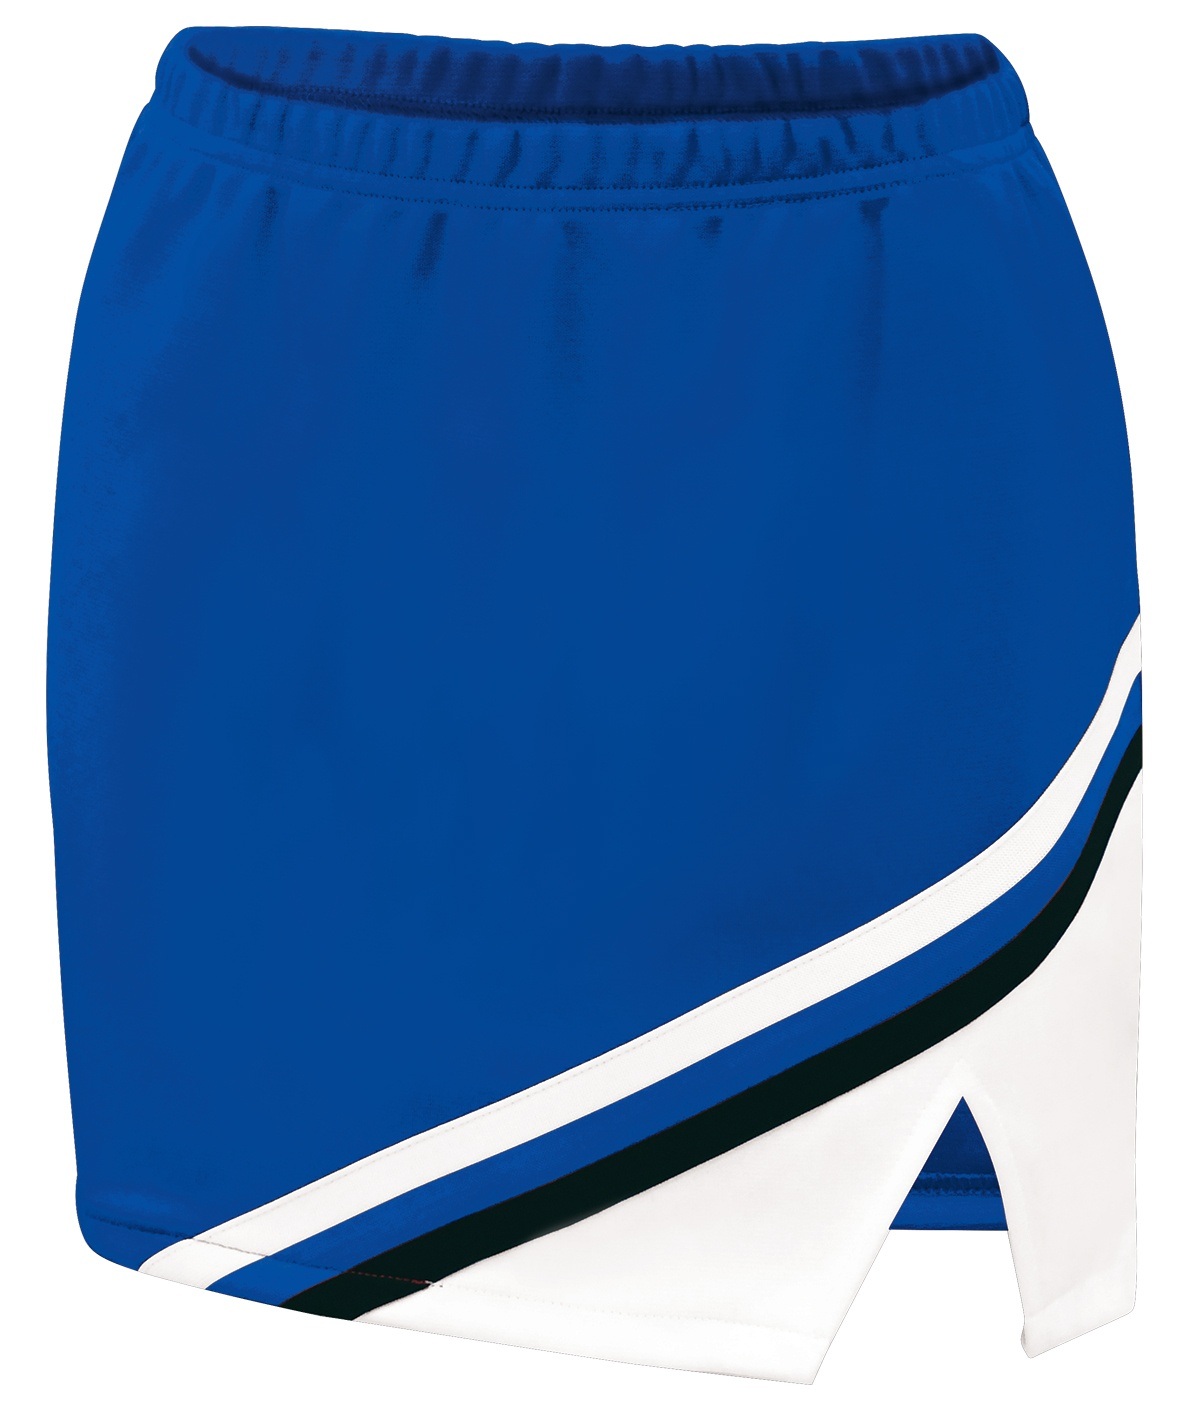 Chasse Sport Victory Skirt